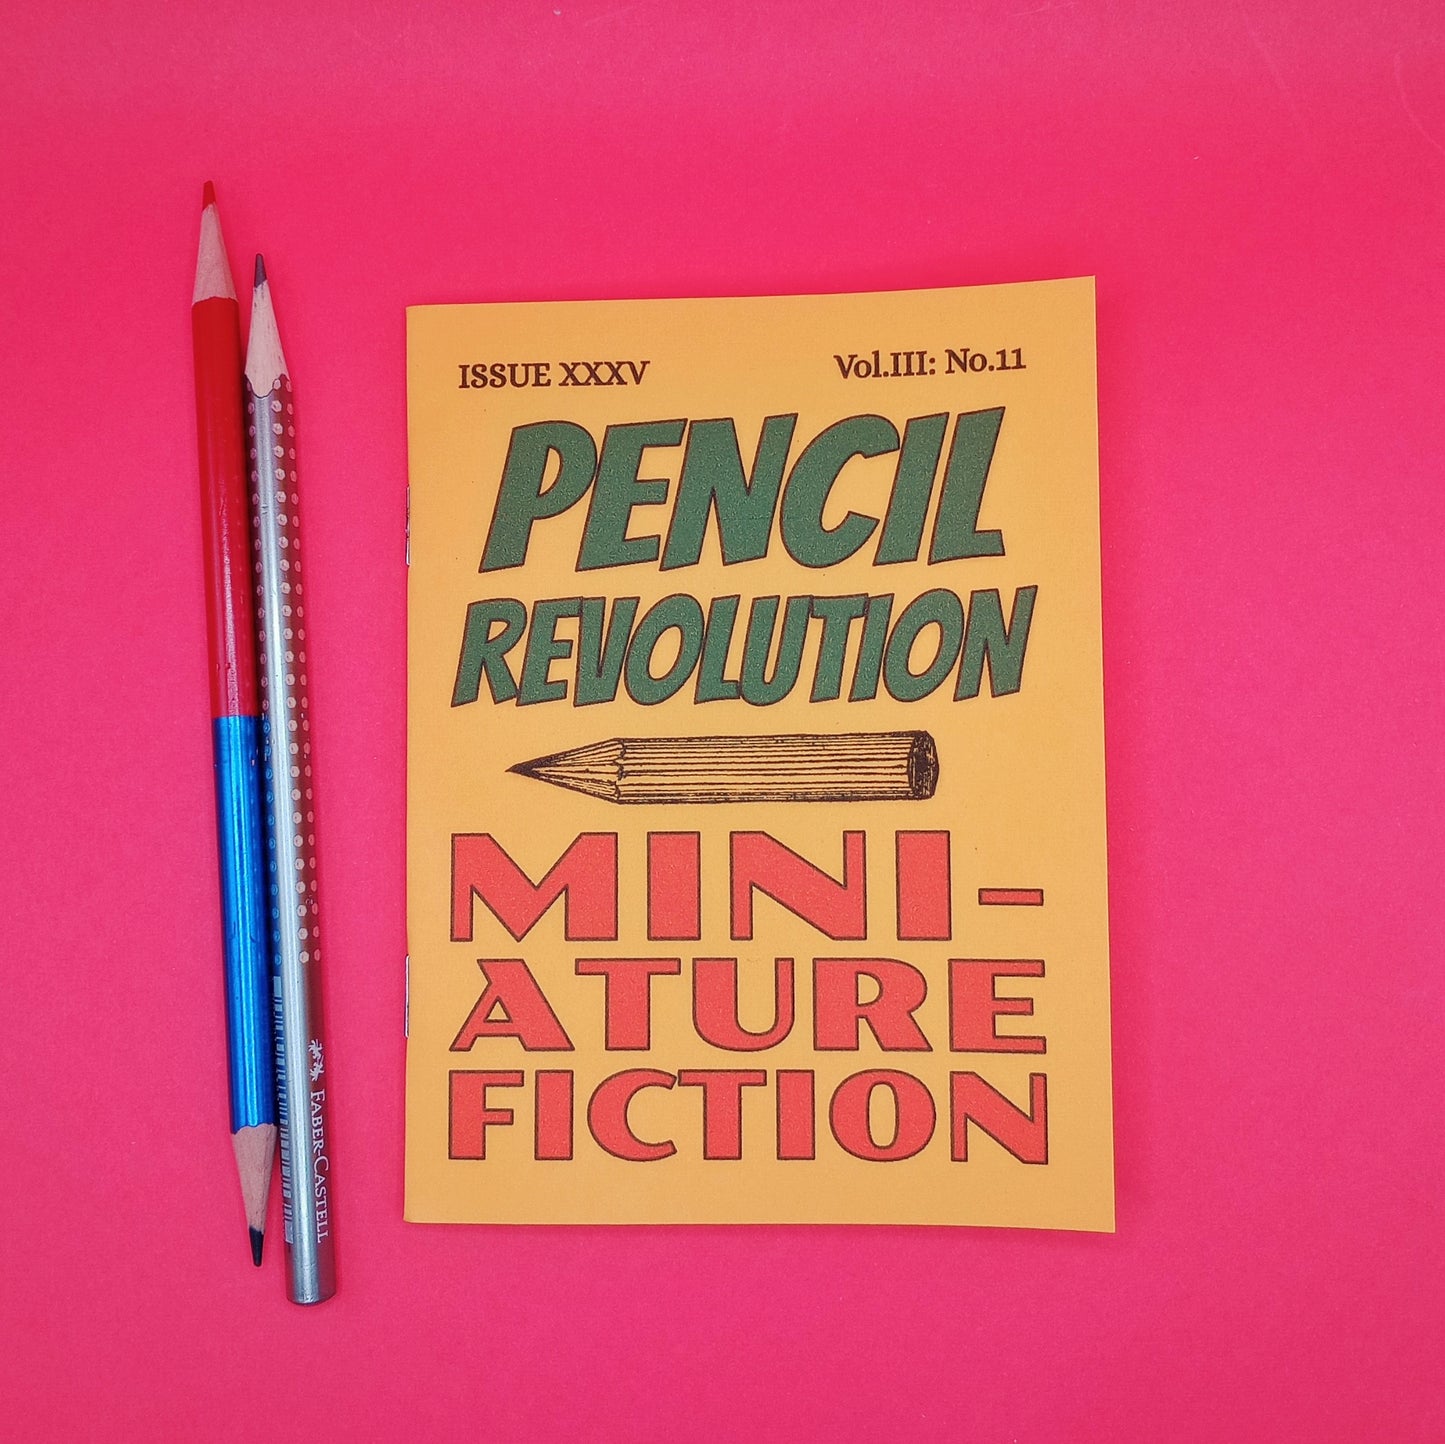 The Pencil Revolution #35: The Miniature Fiction Issue